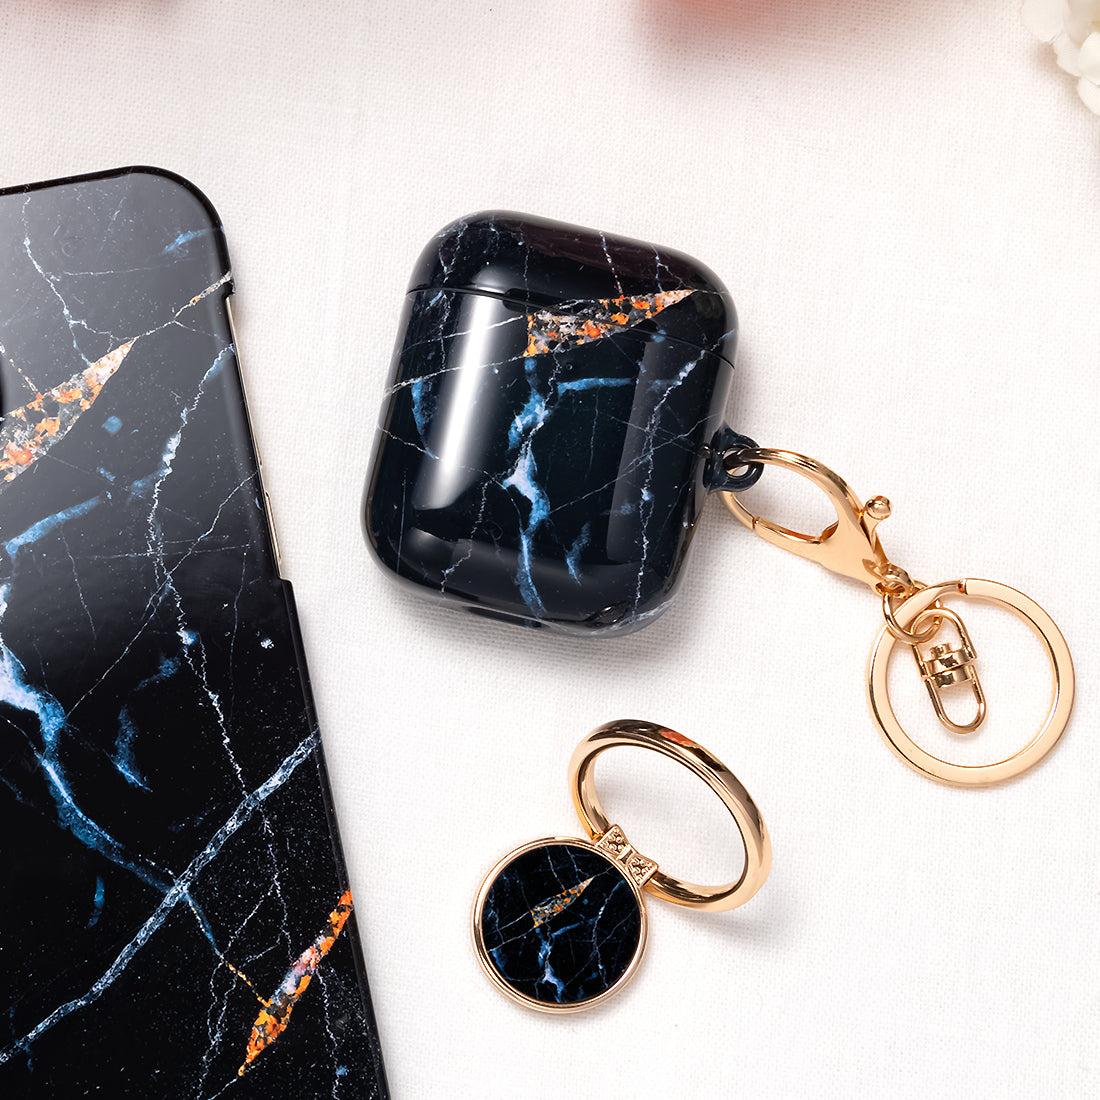 Midnight Marble | Custom AirPods Case